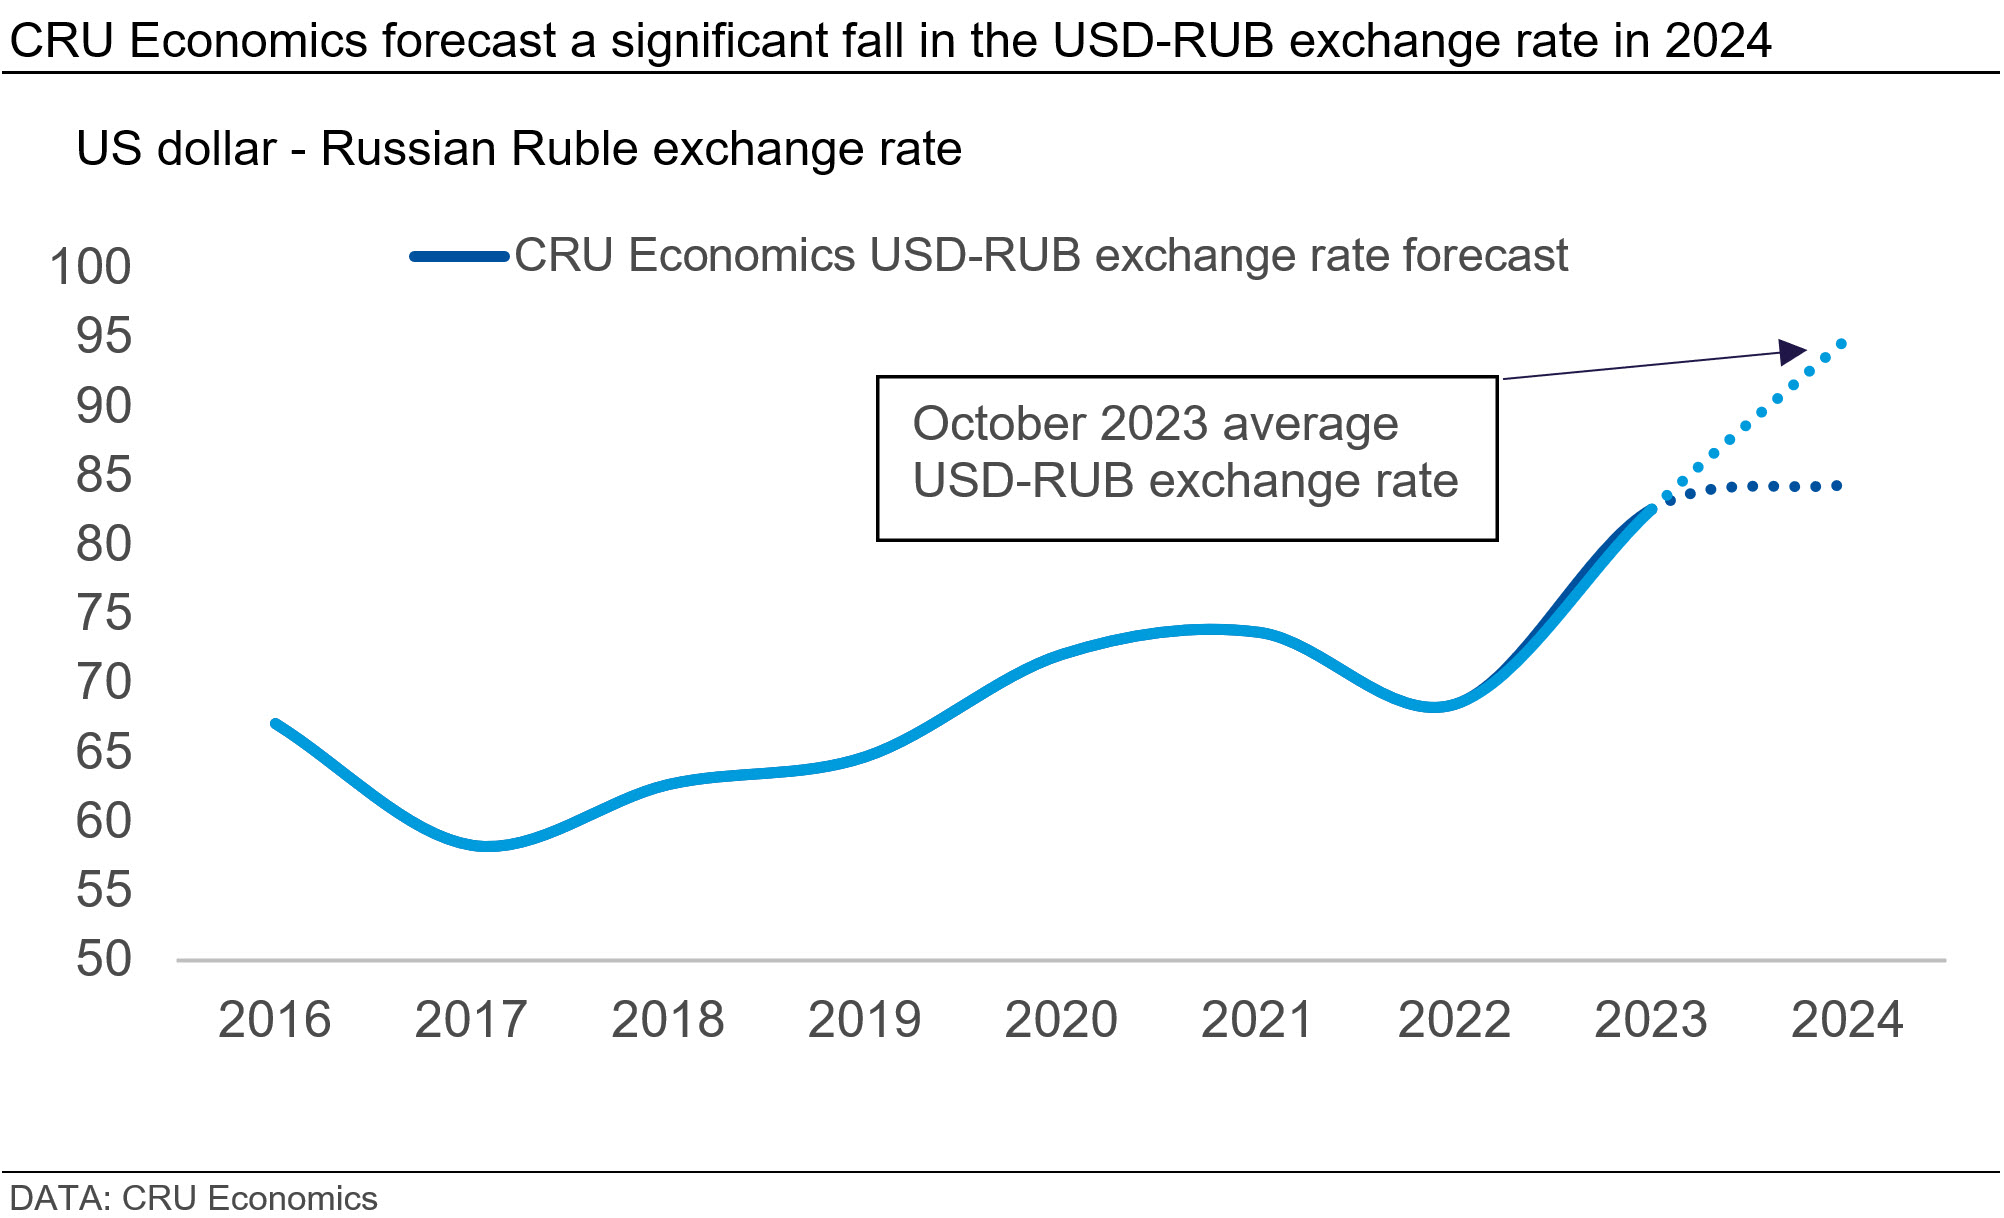 Graph showing that CRU Economics forecast a significant fall in the USD-RUB exchange rate in 2024